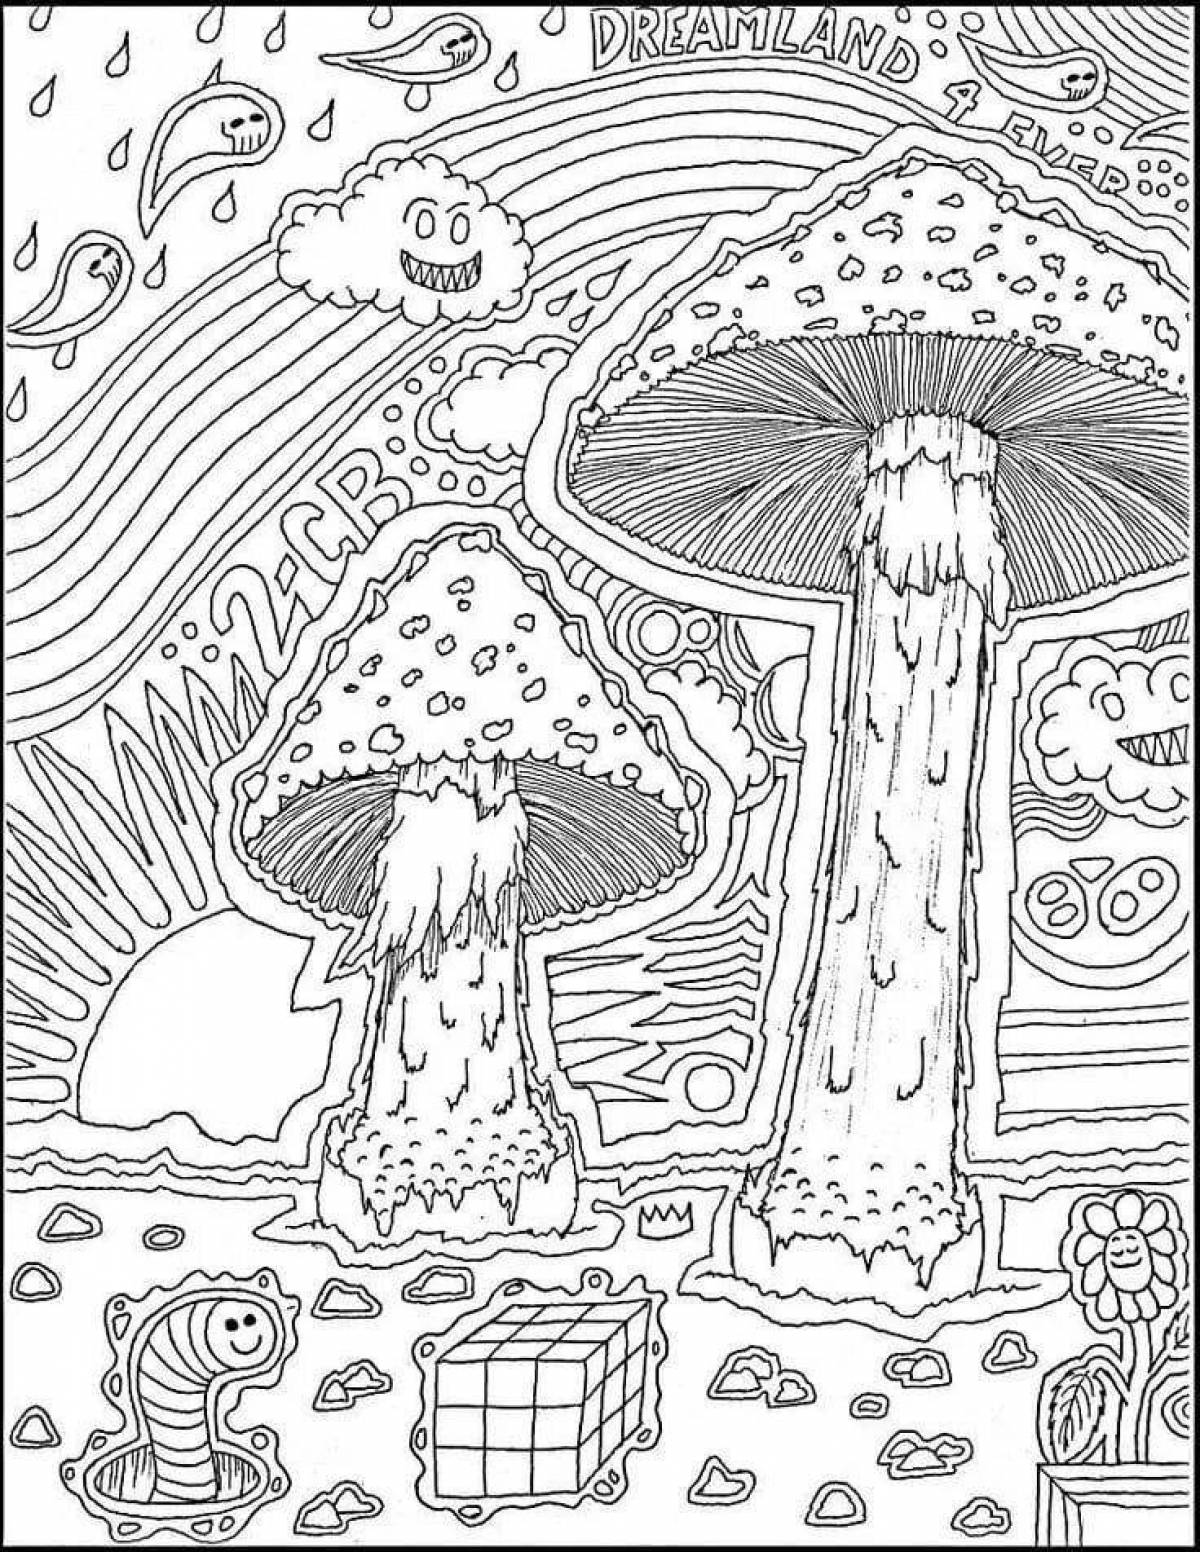 Innovative coloring poster